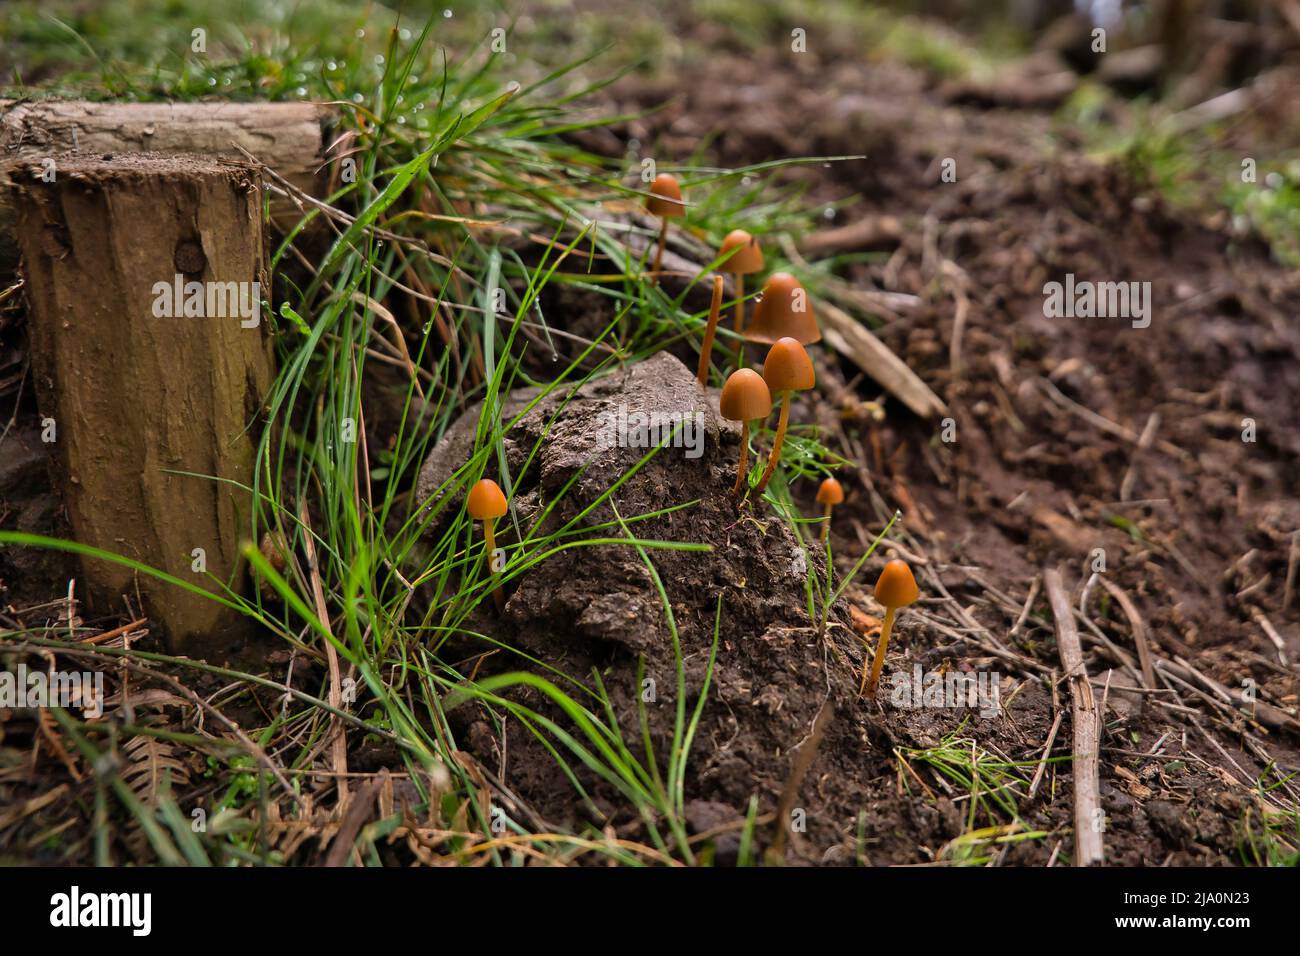 Inedible mushrooms conocybe growing among a green grass on a footpath. Shallow depth of field, Madeira, Portugal Stock Photo